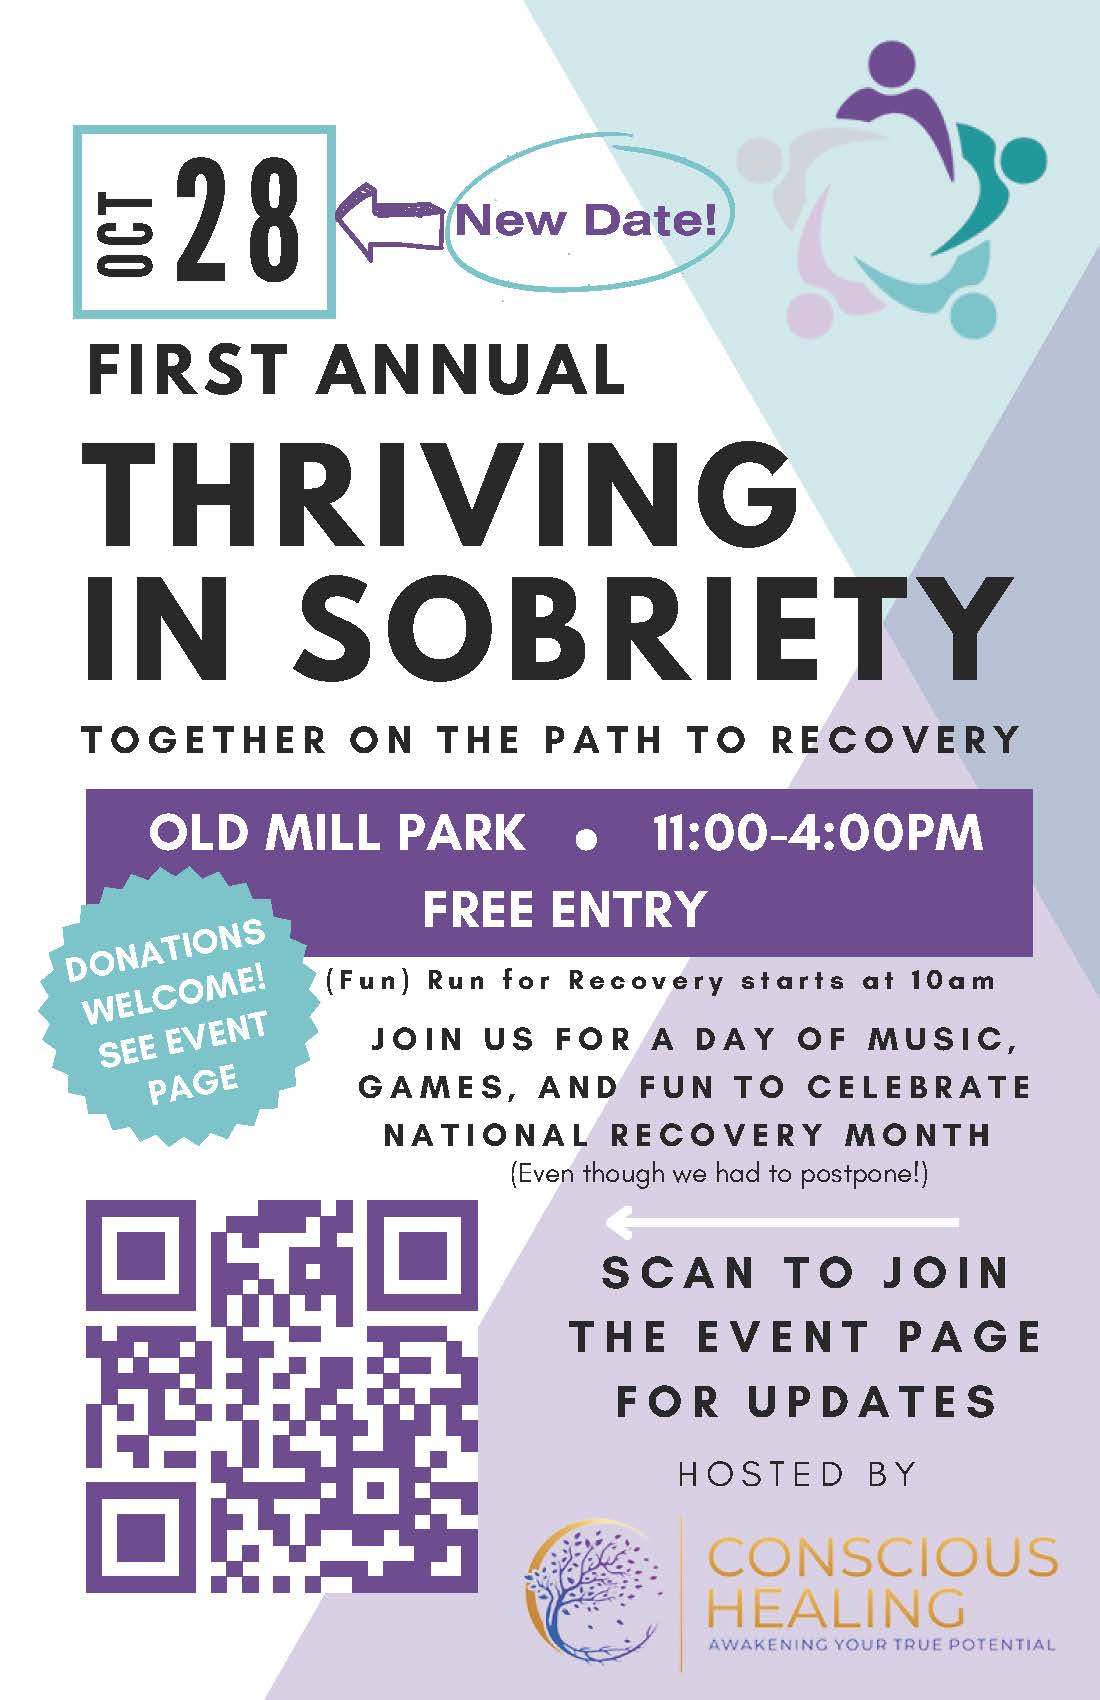 <h1 class="tribe-events-single-event-title">Thriving in Sobriety: Together on the Path to Recovery</h1>